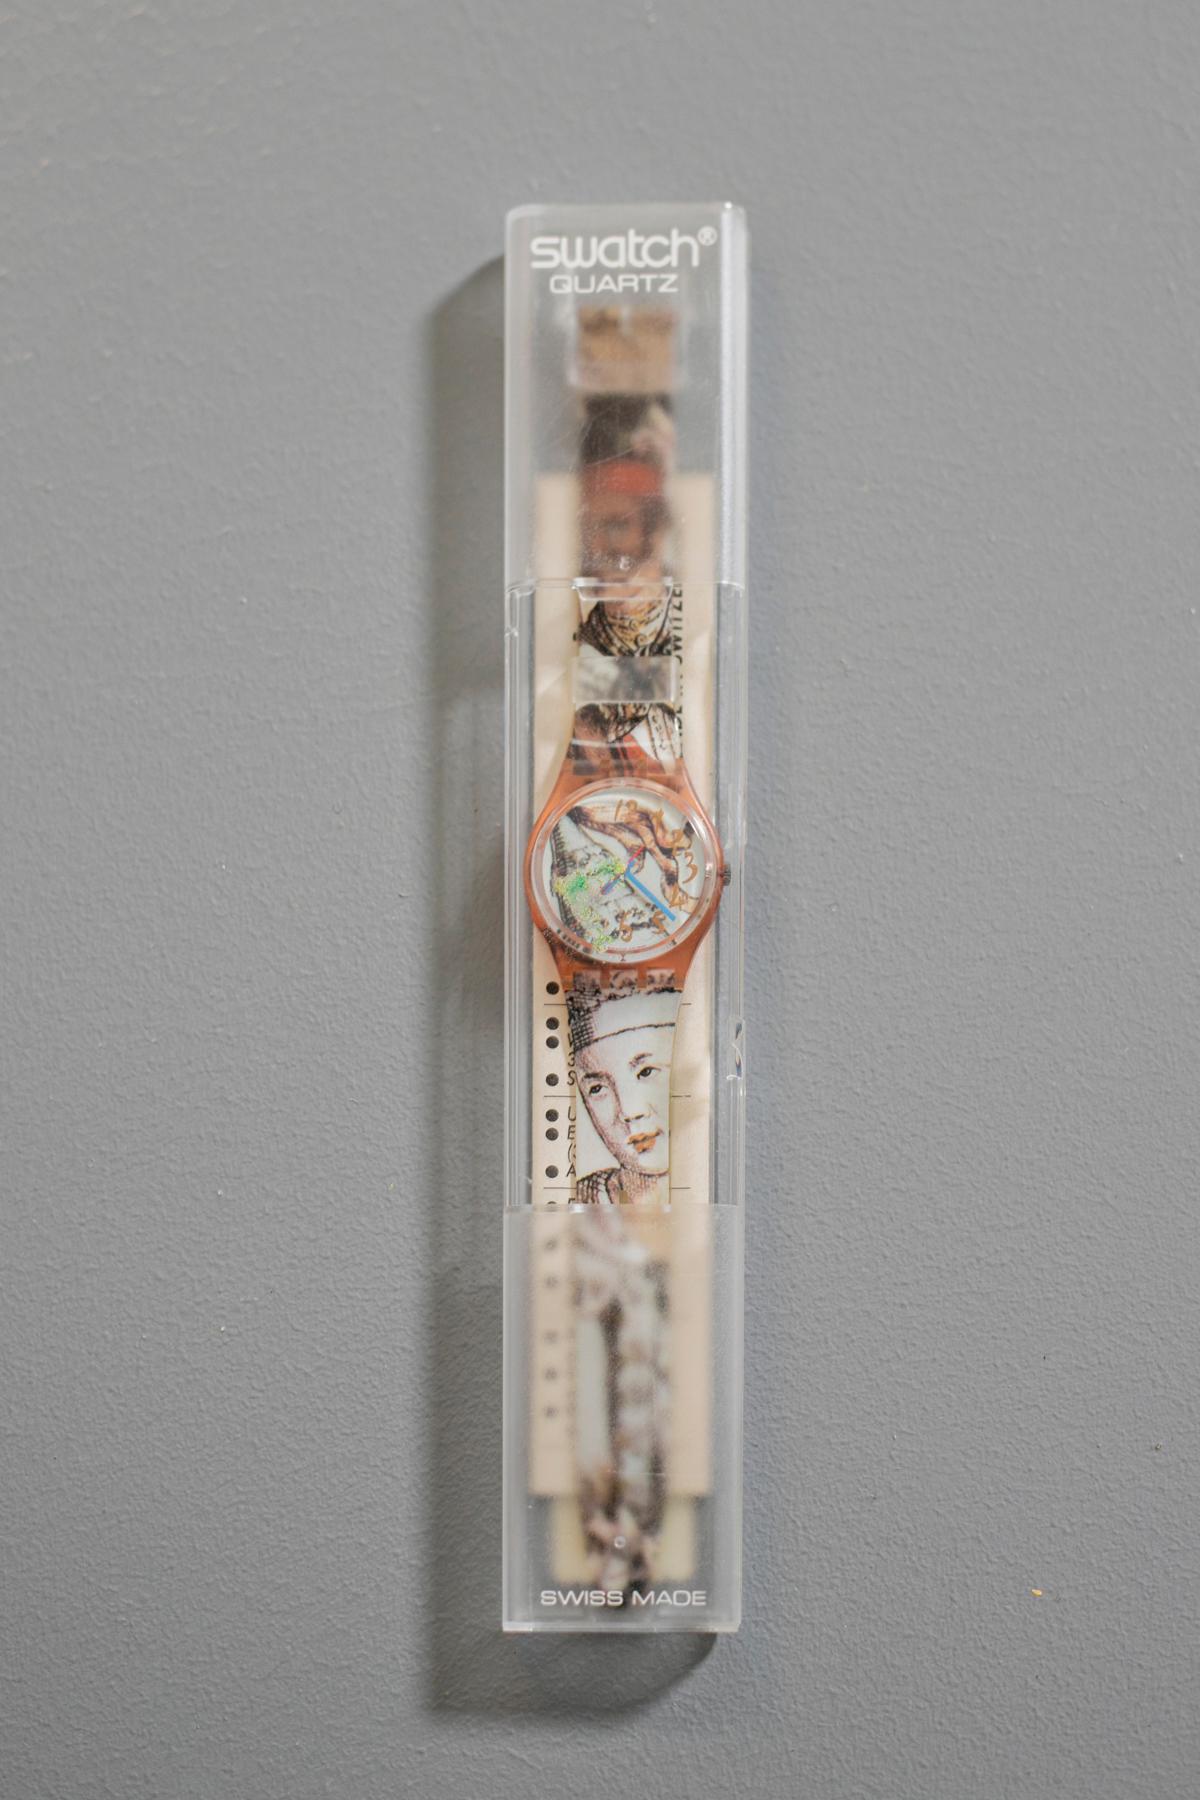 Particular vintage Swatch, along the strap there are two bizarre characters, dressed in clothes from another era. The drawing seems to have been done in pencil, the colors are as delicate as the stroke. A very special piece from the 1993